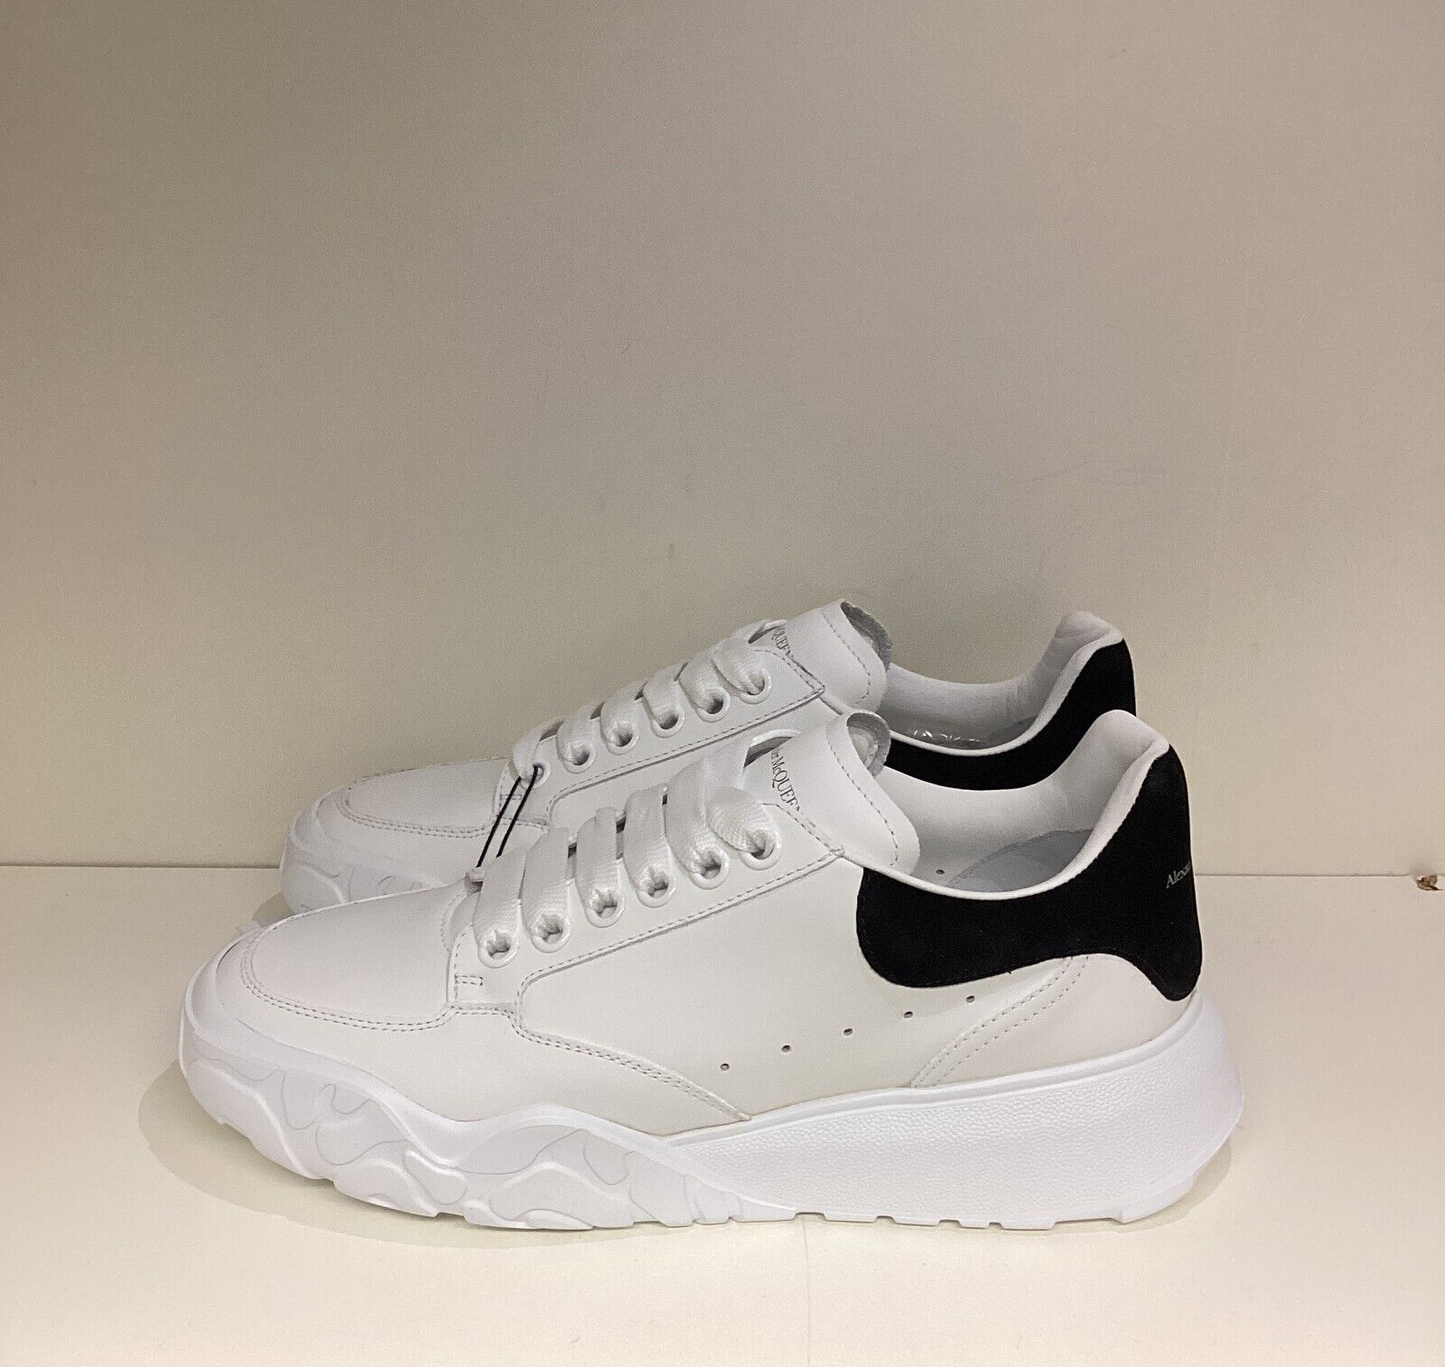 NEW - ALEXANDER MCQUEEN WHITE LEATHER TRAINERS - SIZE 39.5 (6.5 UK)